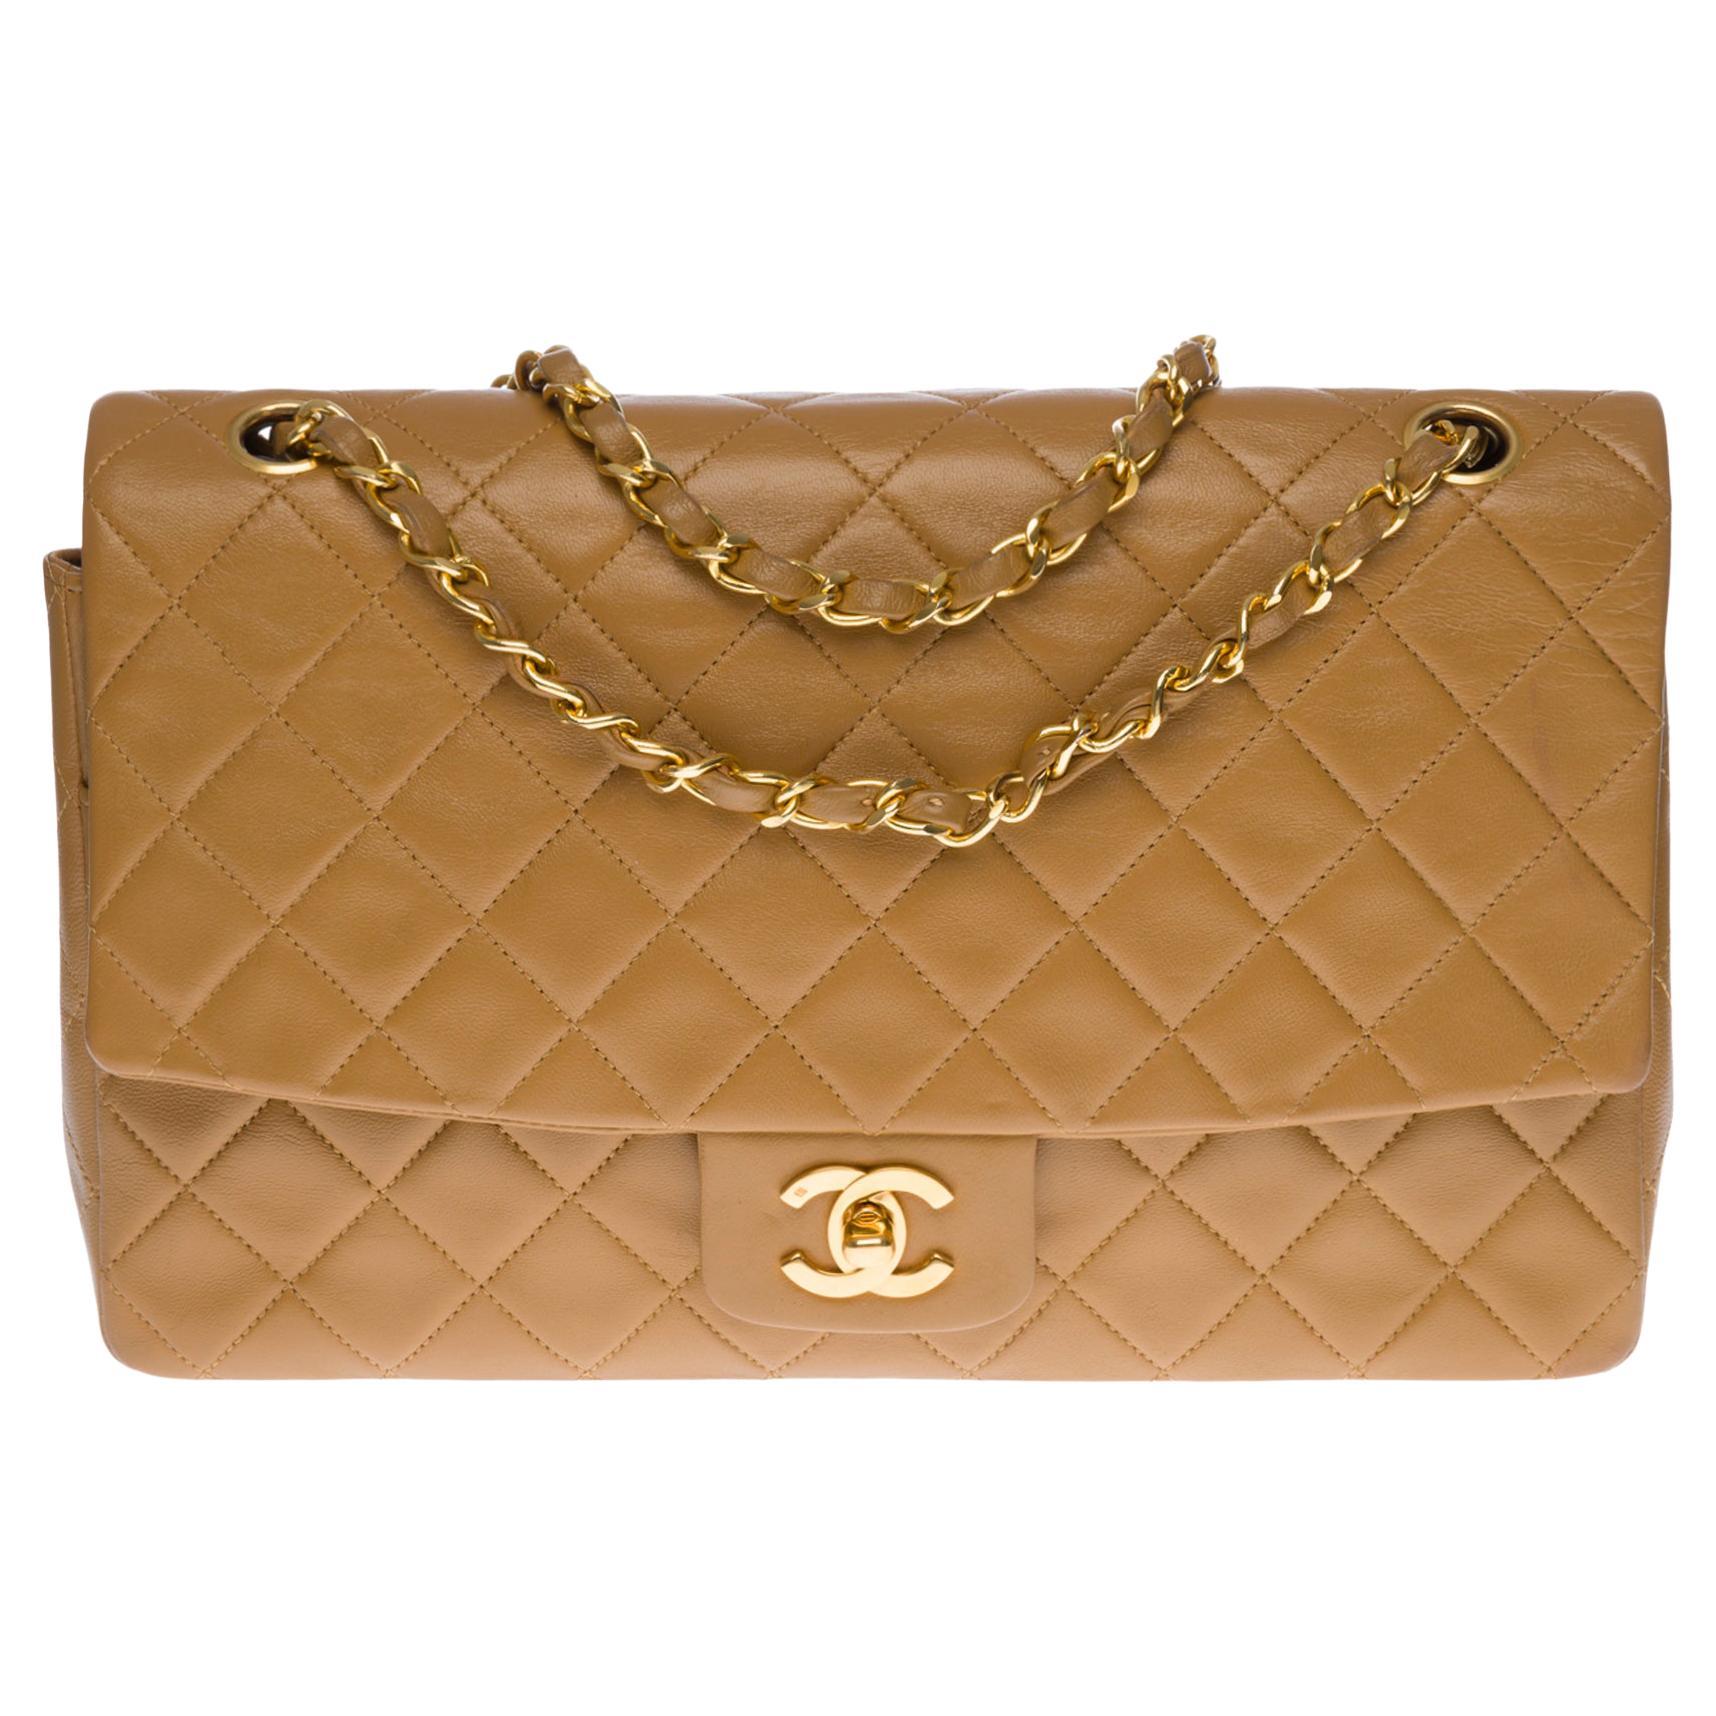 Chanel 22 leather handbag Chanel Camel in Leather - 33435648